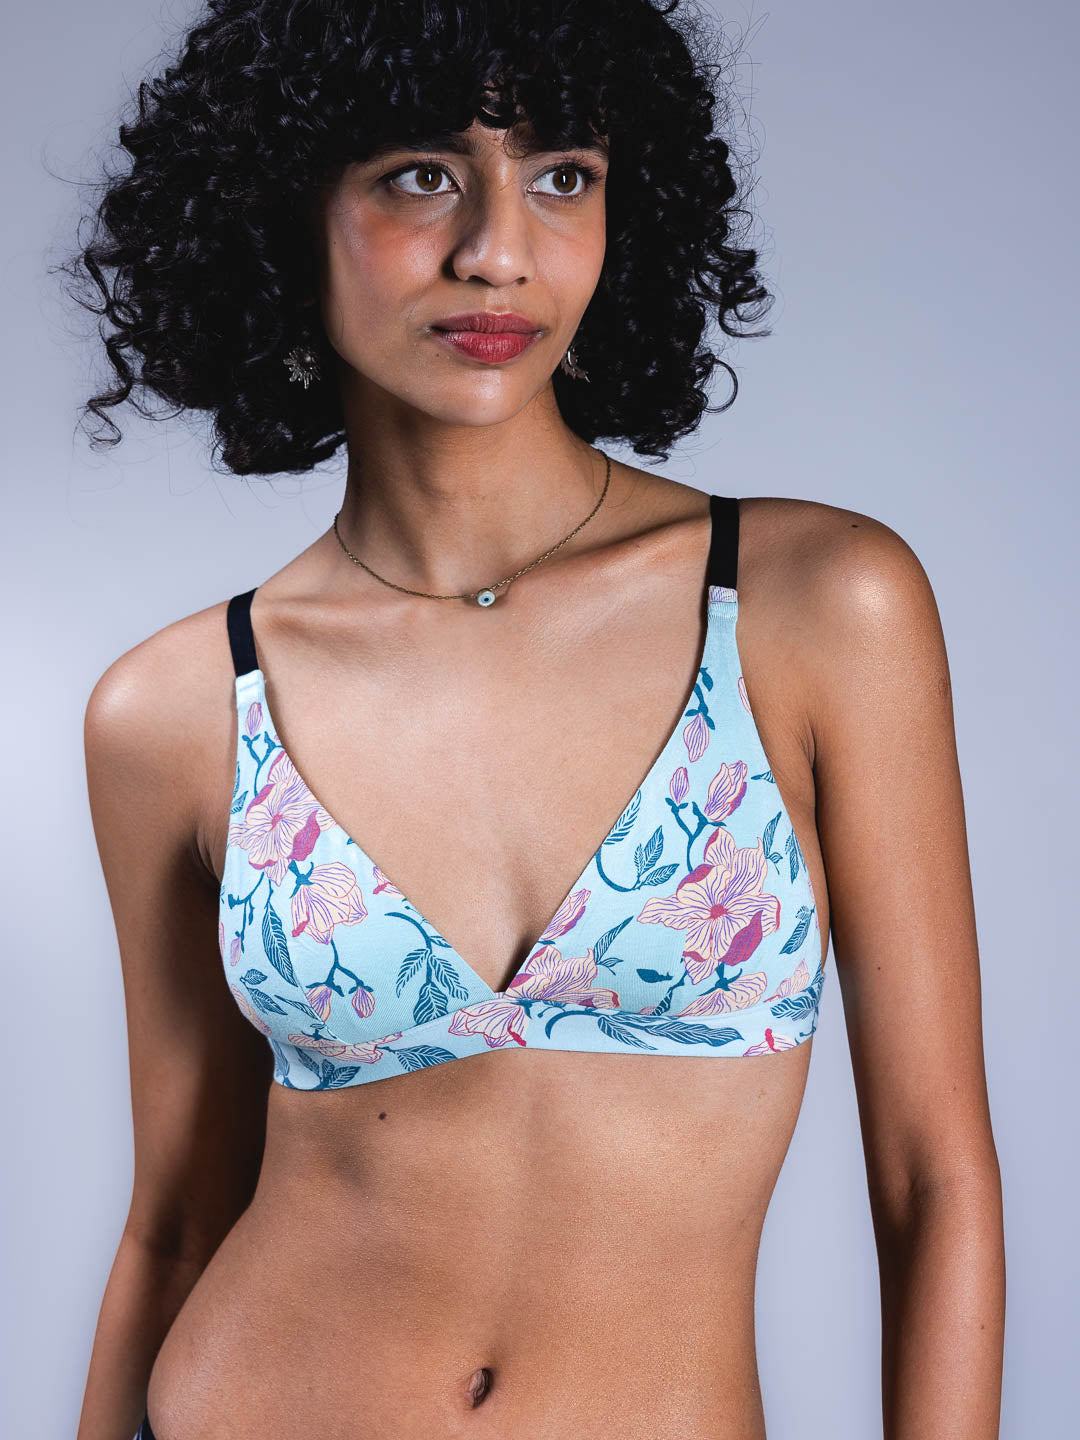 Buy Triangle bra with removable pads Online in Dubai & the UAE